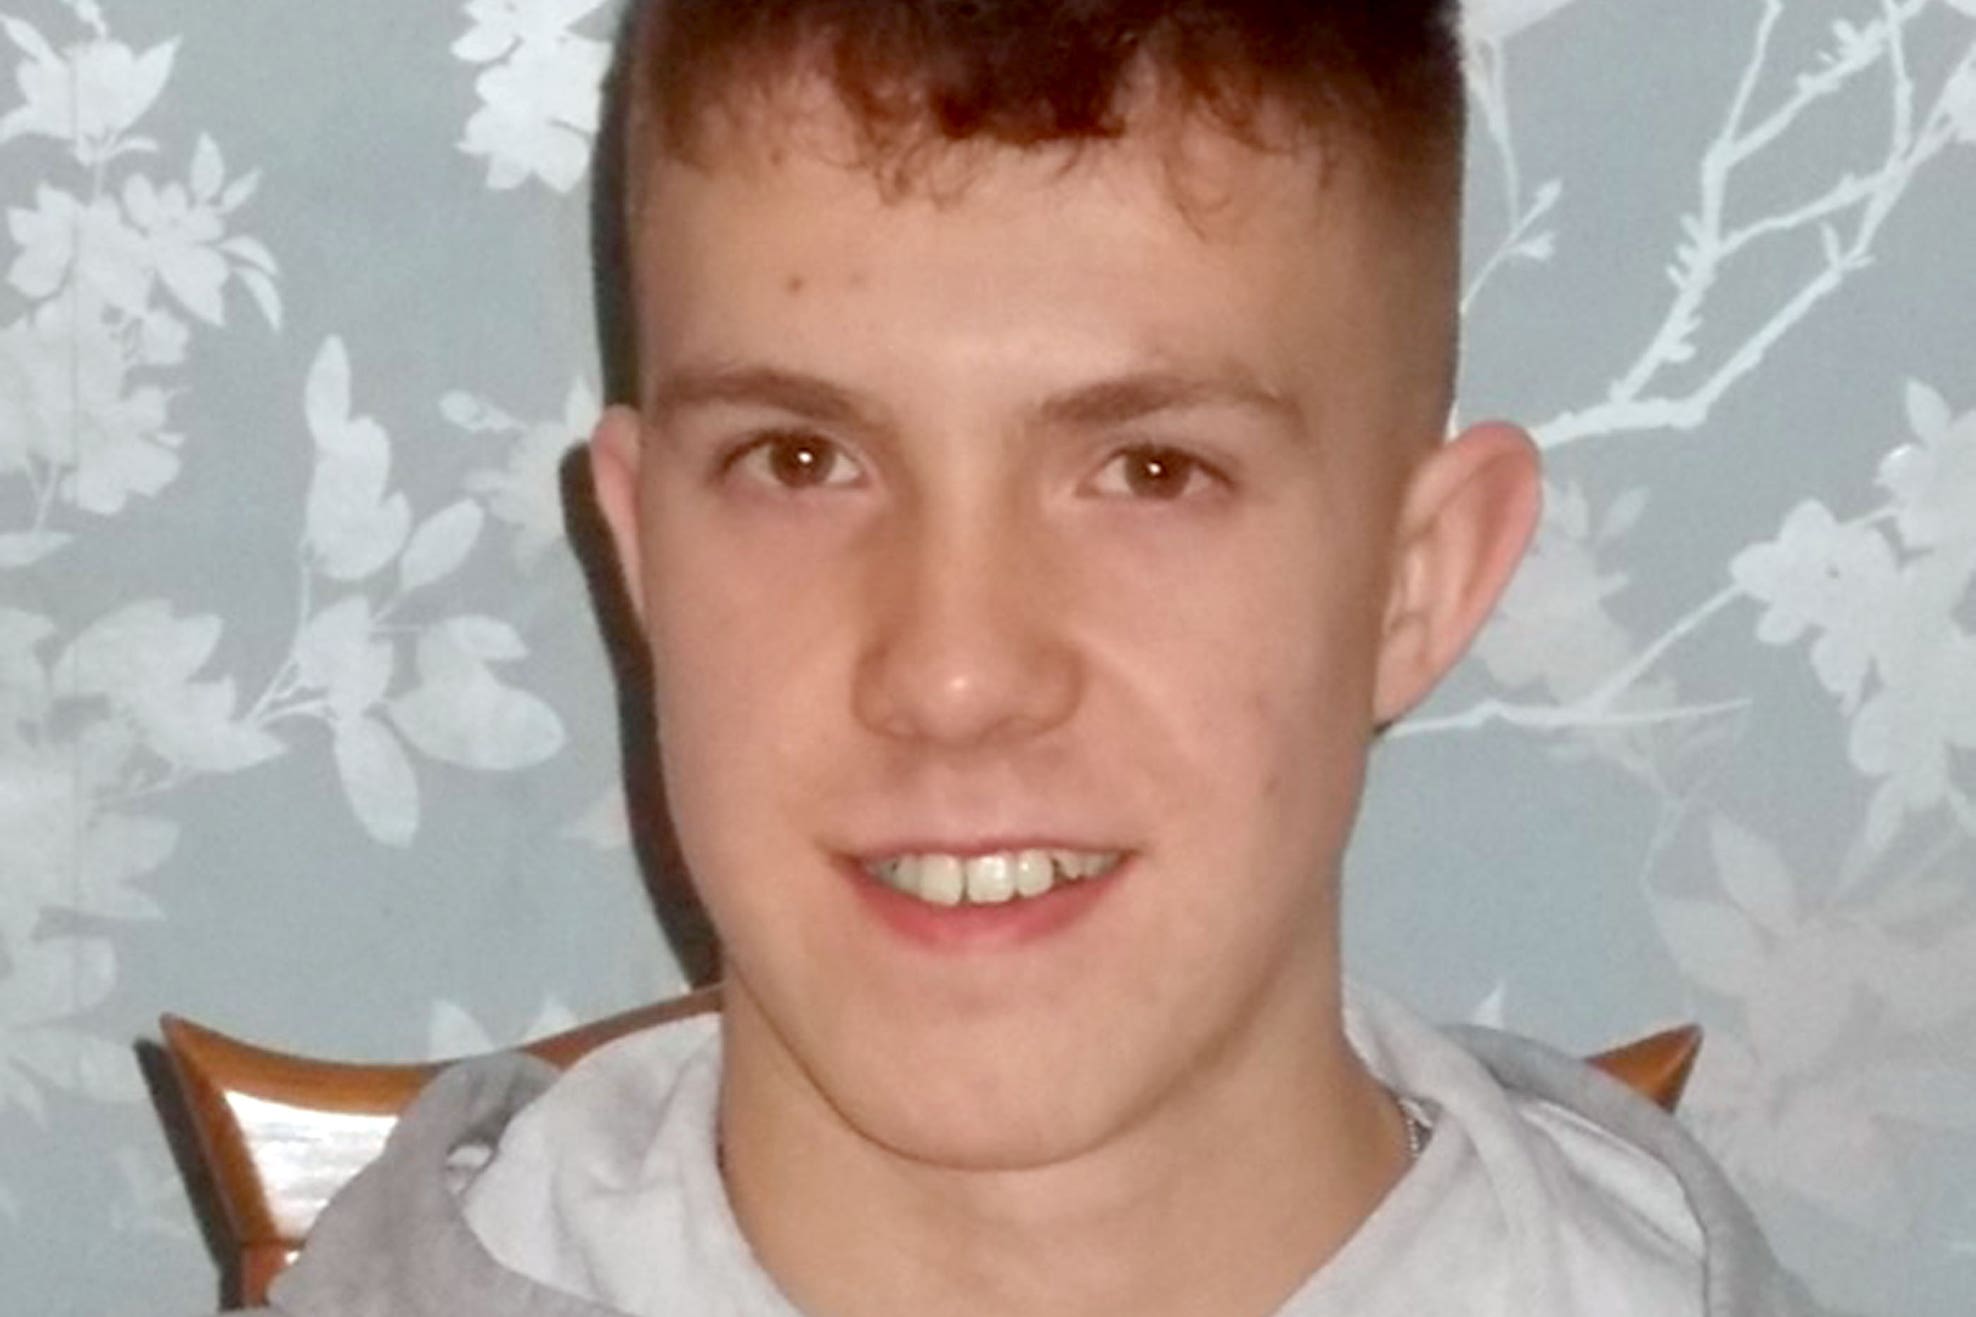 Joe Abbess,17, from Southampton, who has been named by police as the boy who died after getting into difficulty in the water off Bournemouth beach on Wednesday